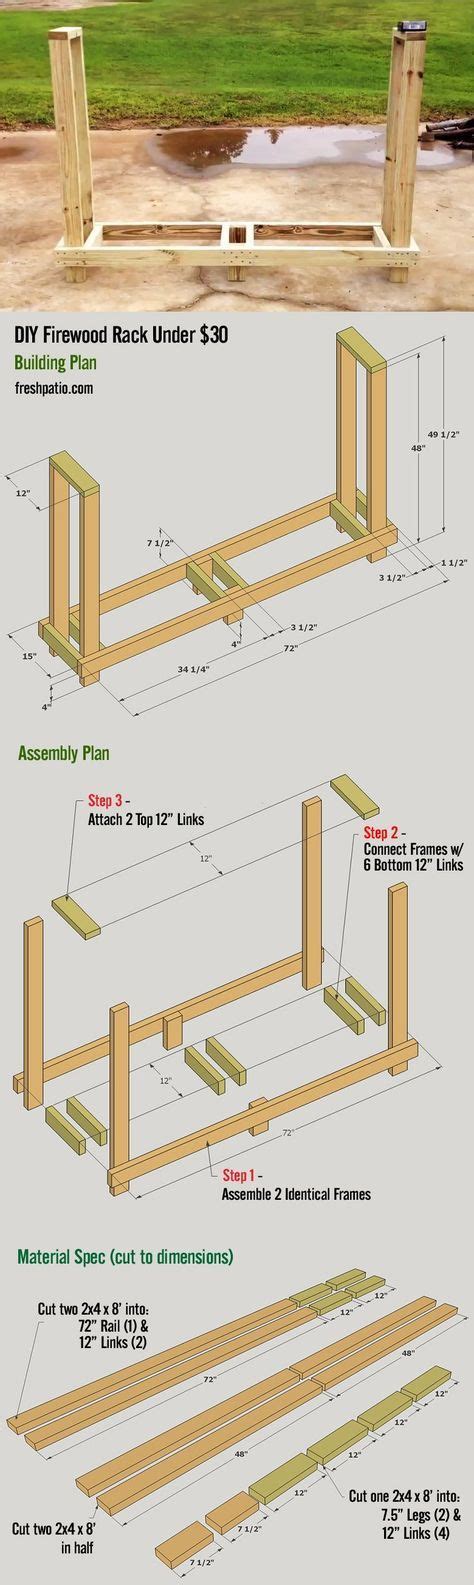 4 Free Firewood Rack Plans Built From 2x4s Two Under 30 Firewood